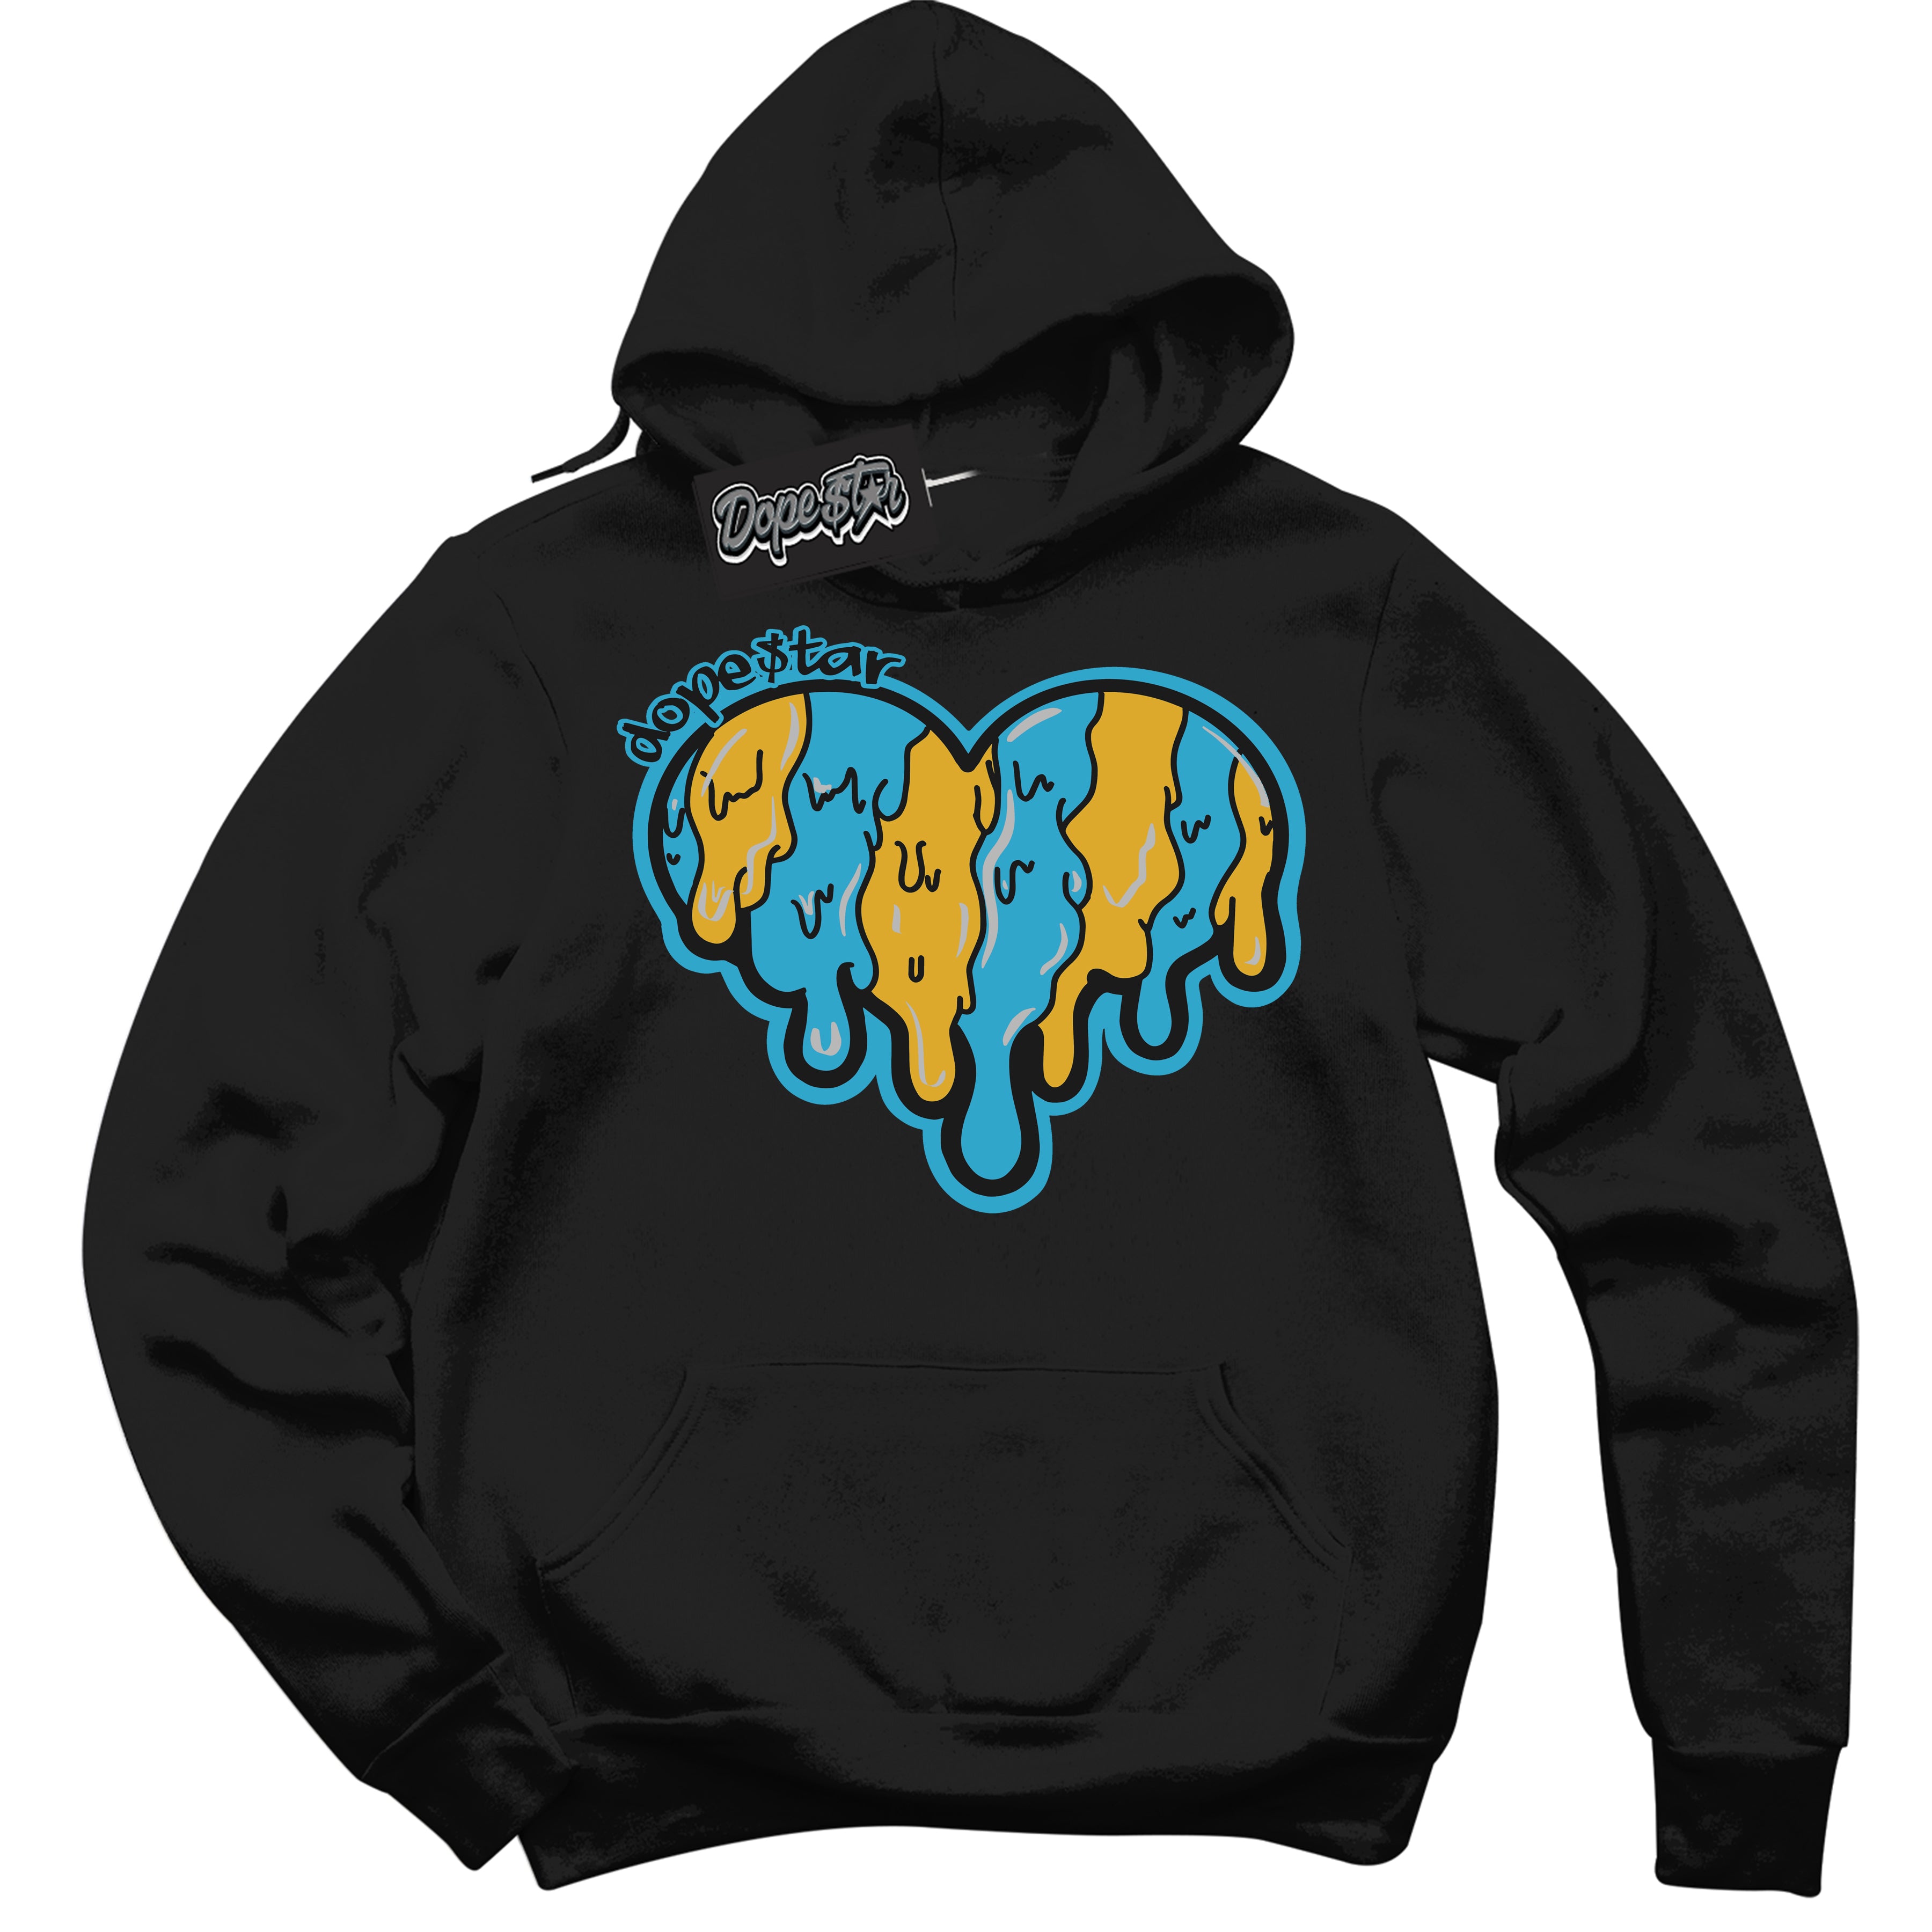 Cool Black Hoodie with “ Melting Heart ”  design that Perfectly Matches Aqua 5s Sneakers.